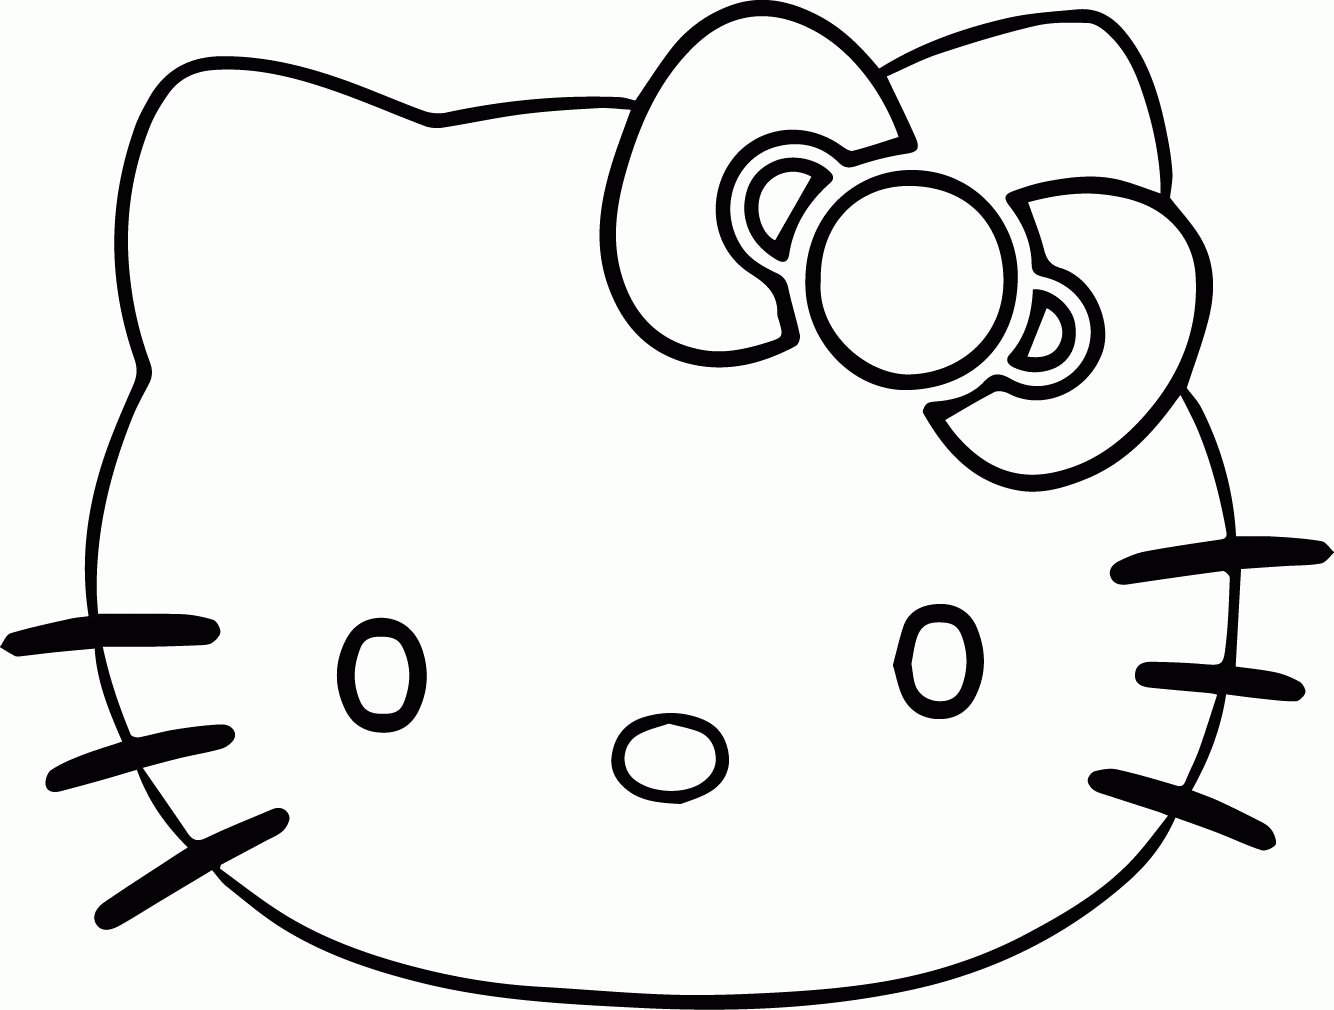 Kitten Face Coloring Page : Cat Coloring Pages Karen S Whimsy Kittens